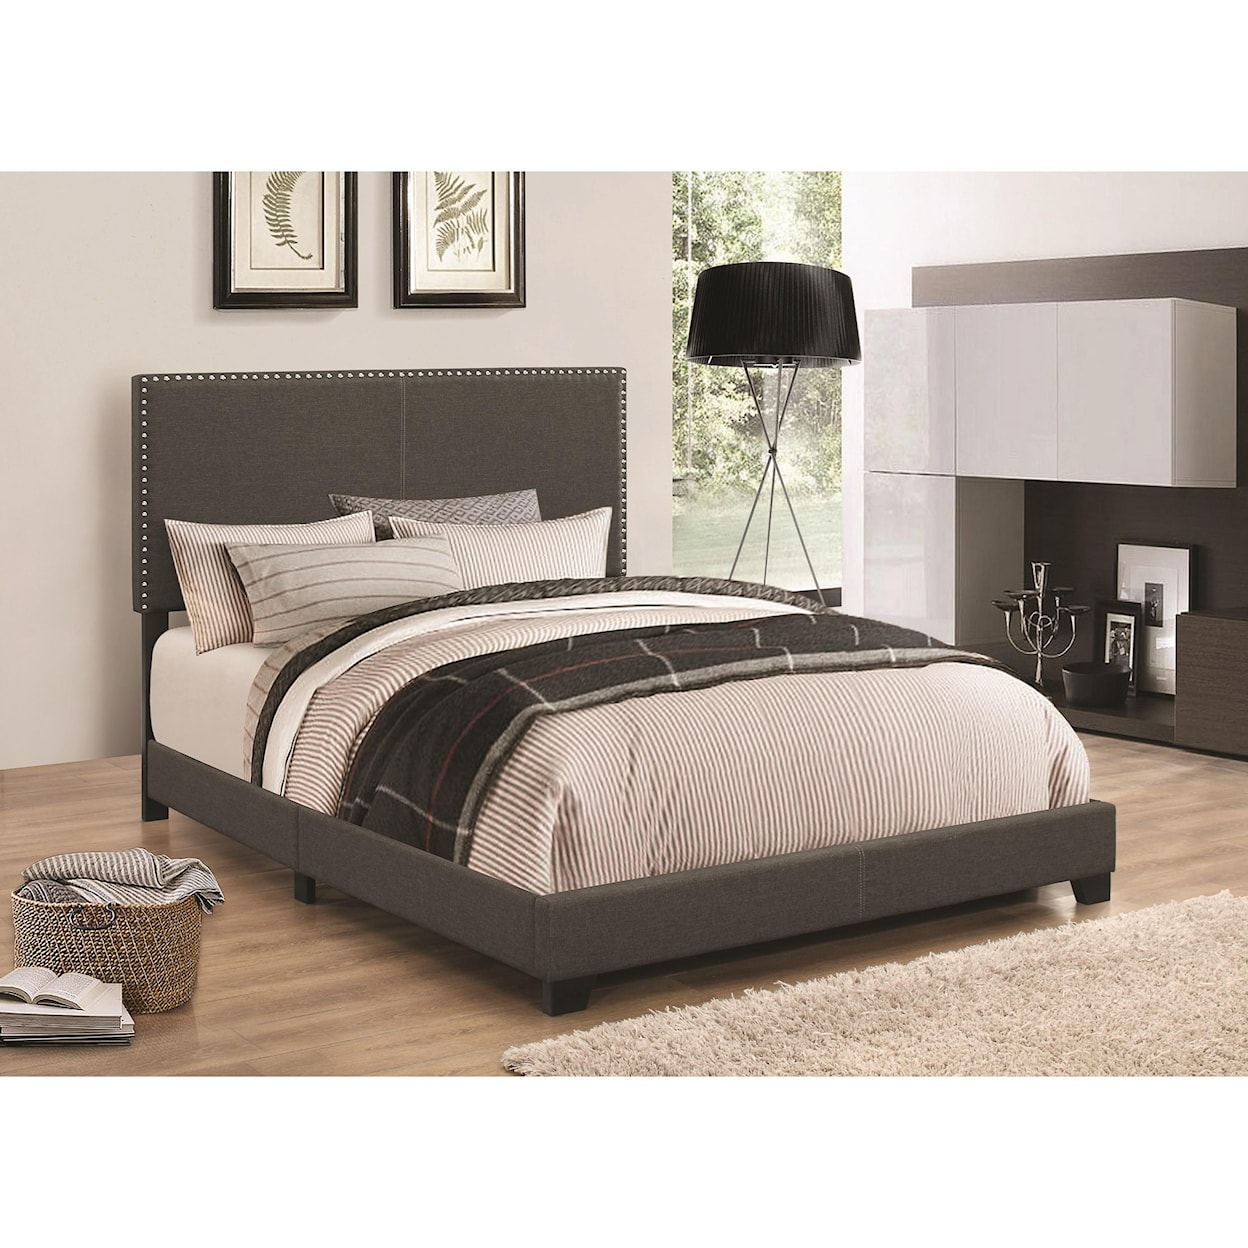 Michael Alan CSR Select Upholstered Beds Twin Bed